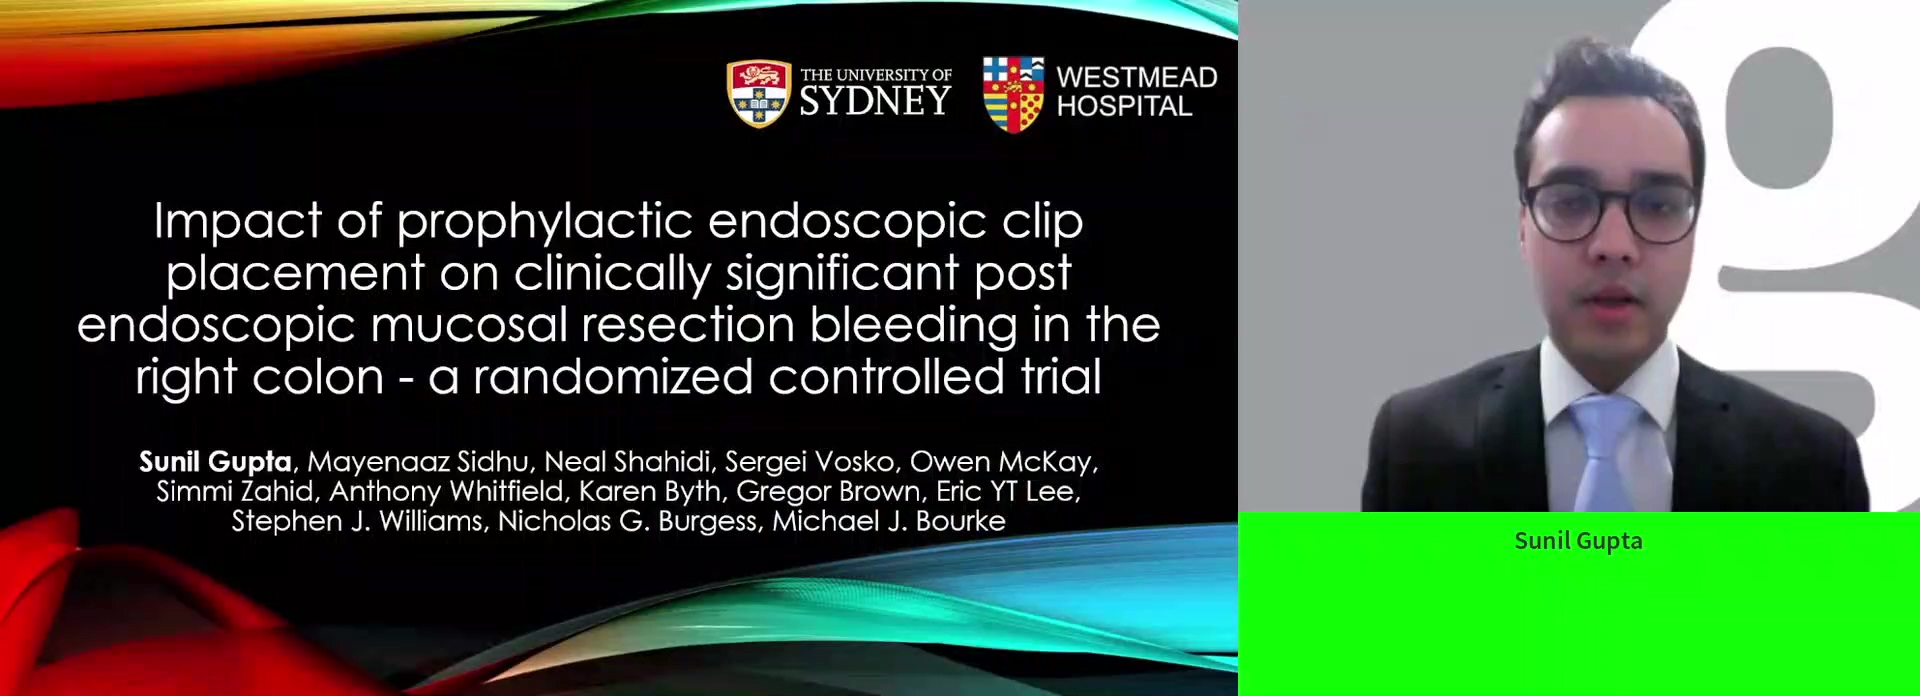 IMPACT OF PROPHYLACTIC ENDOSCOPIC CLIP PLACEMENT ON CLINICALLY SIGNIFICANT POST ENDOSCOPIC MUCOSAL RESECTION BLEEDING IN THE RIGHT COLON - A RANDOMIZED CONTROLLED TRIAL